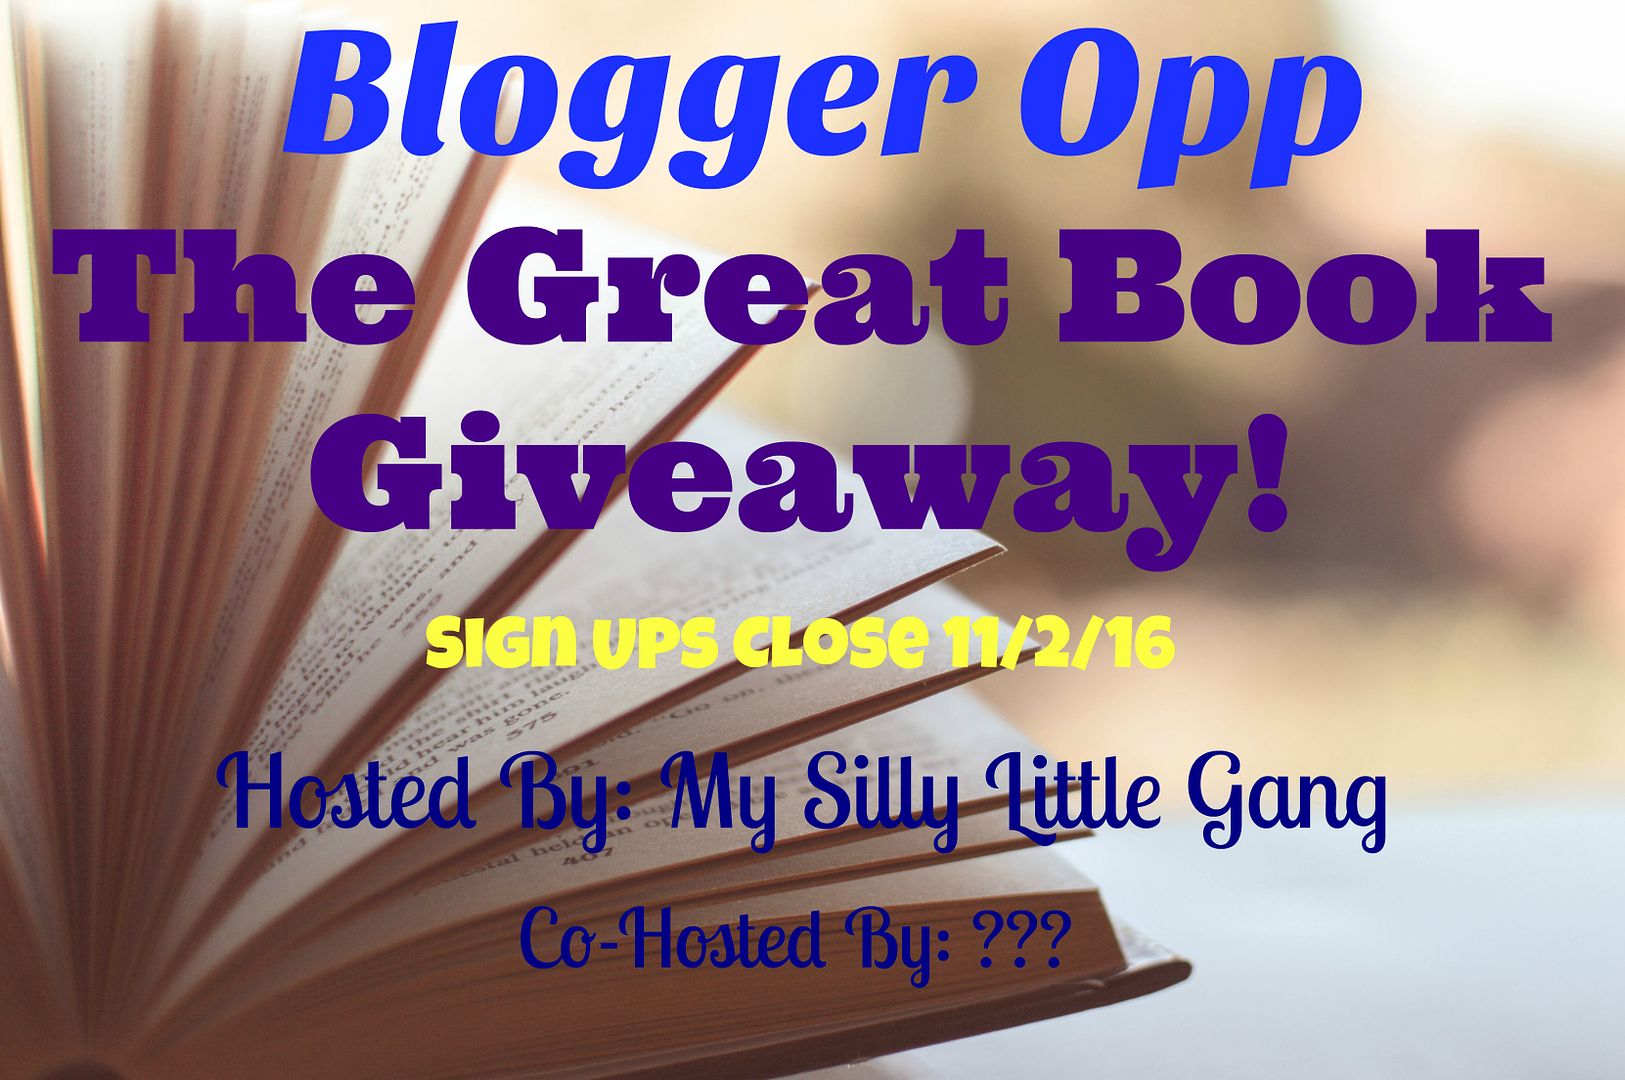 great book giveaway blogger opp